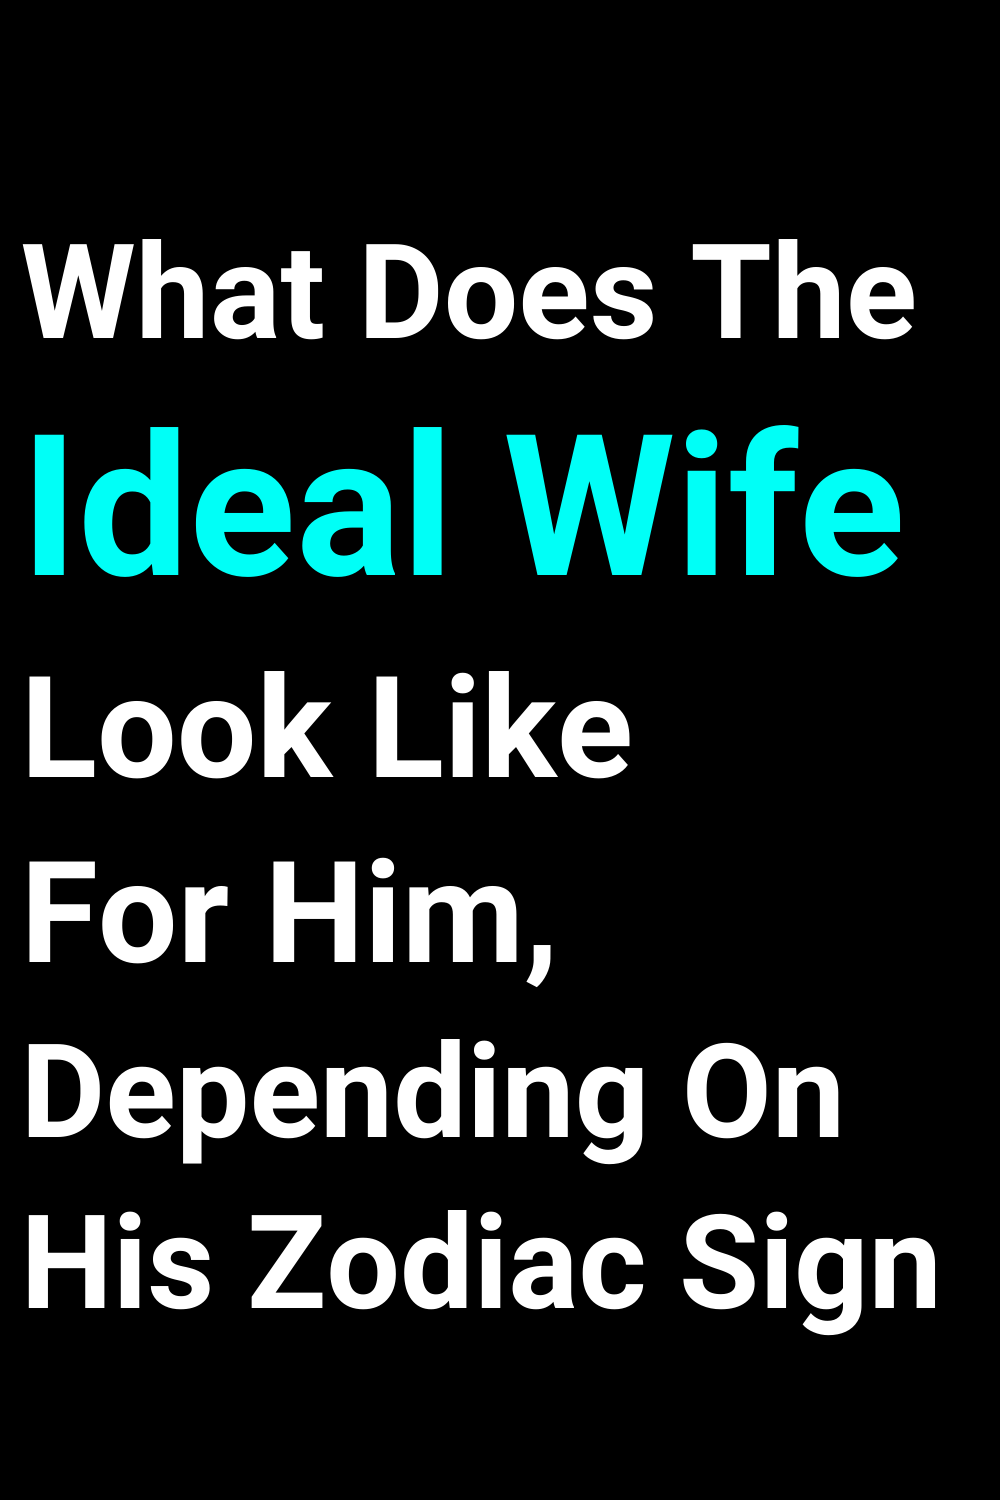 What Does The Ideal Wife Look Like For Him, Depending On His Zodiac Sign